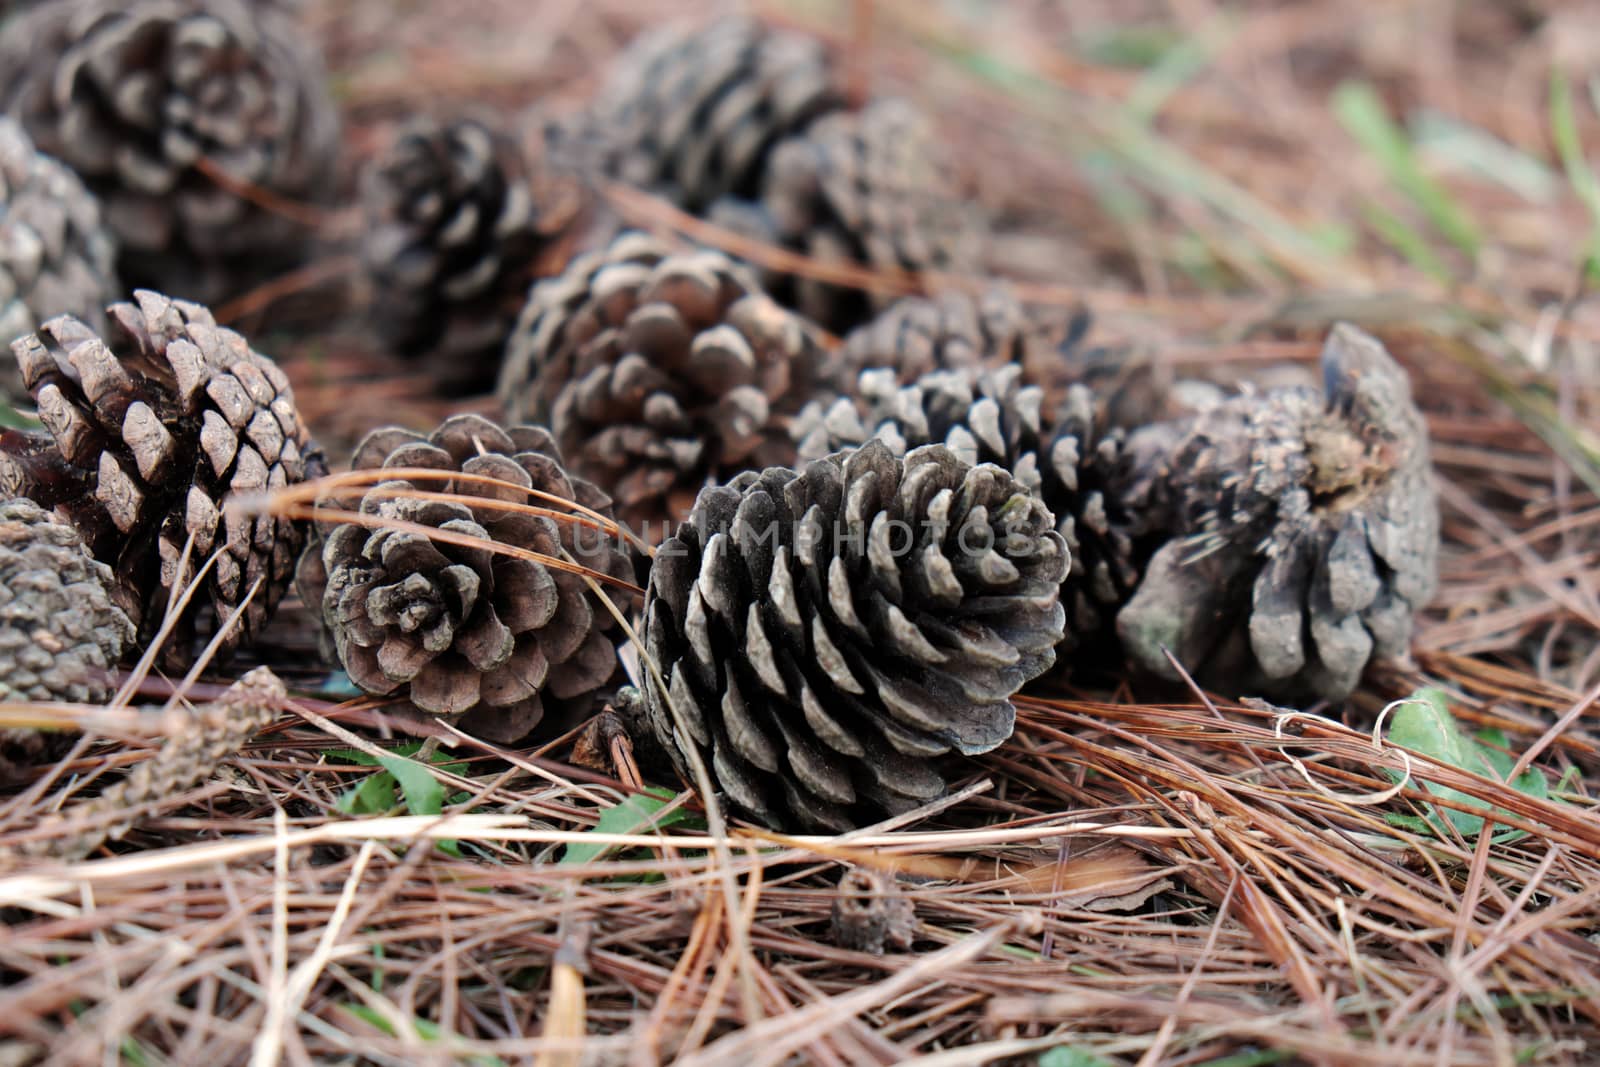 Group of rotten pinecone fall from pine tree in Dalat forest, pine cone is symbol of Christmas season and also is Xmas ornament, ground cover with pine needle